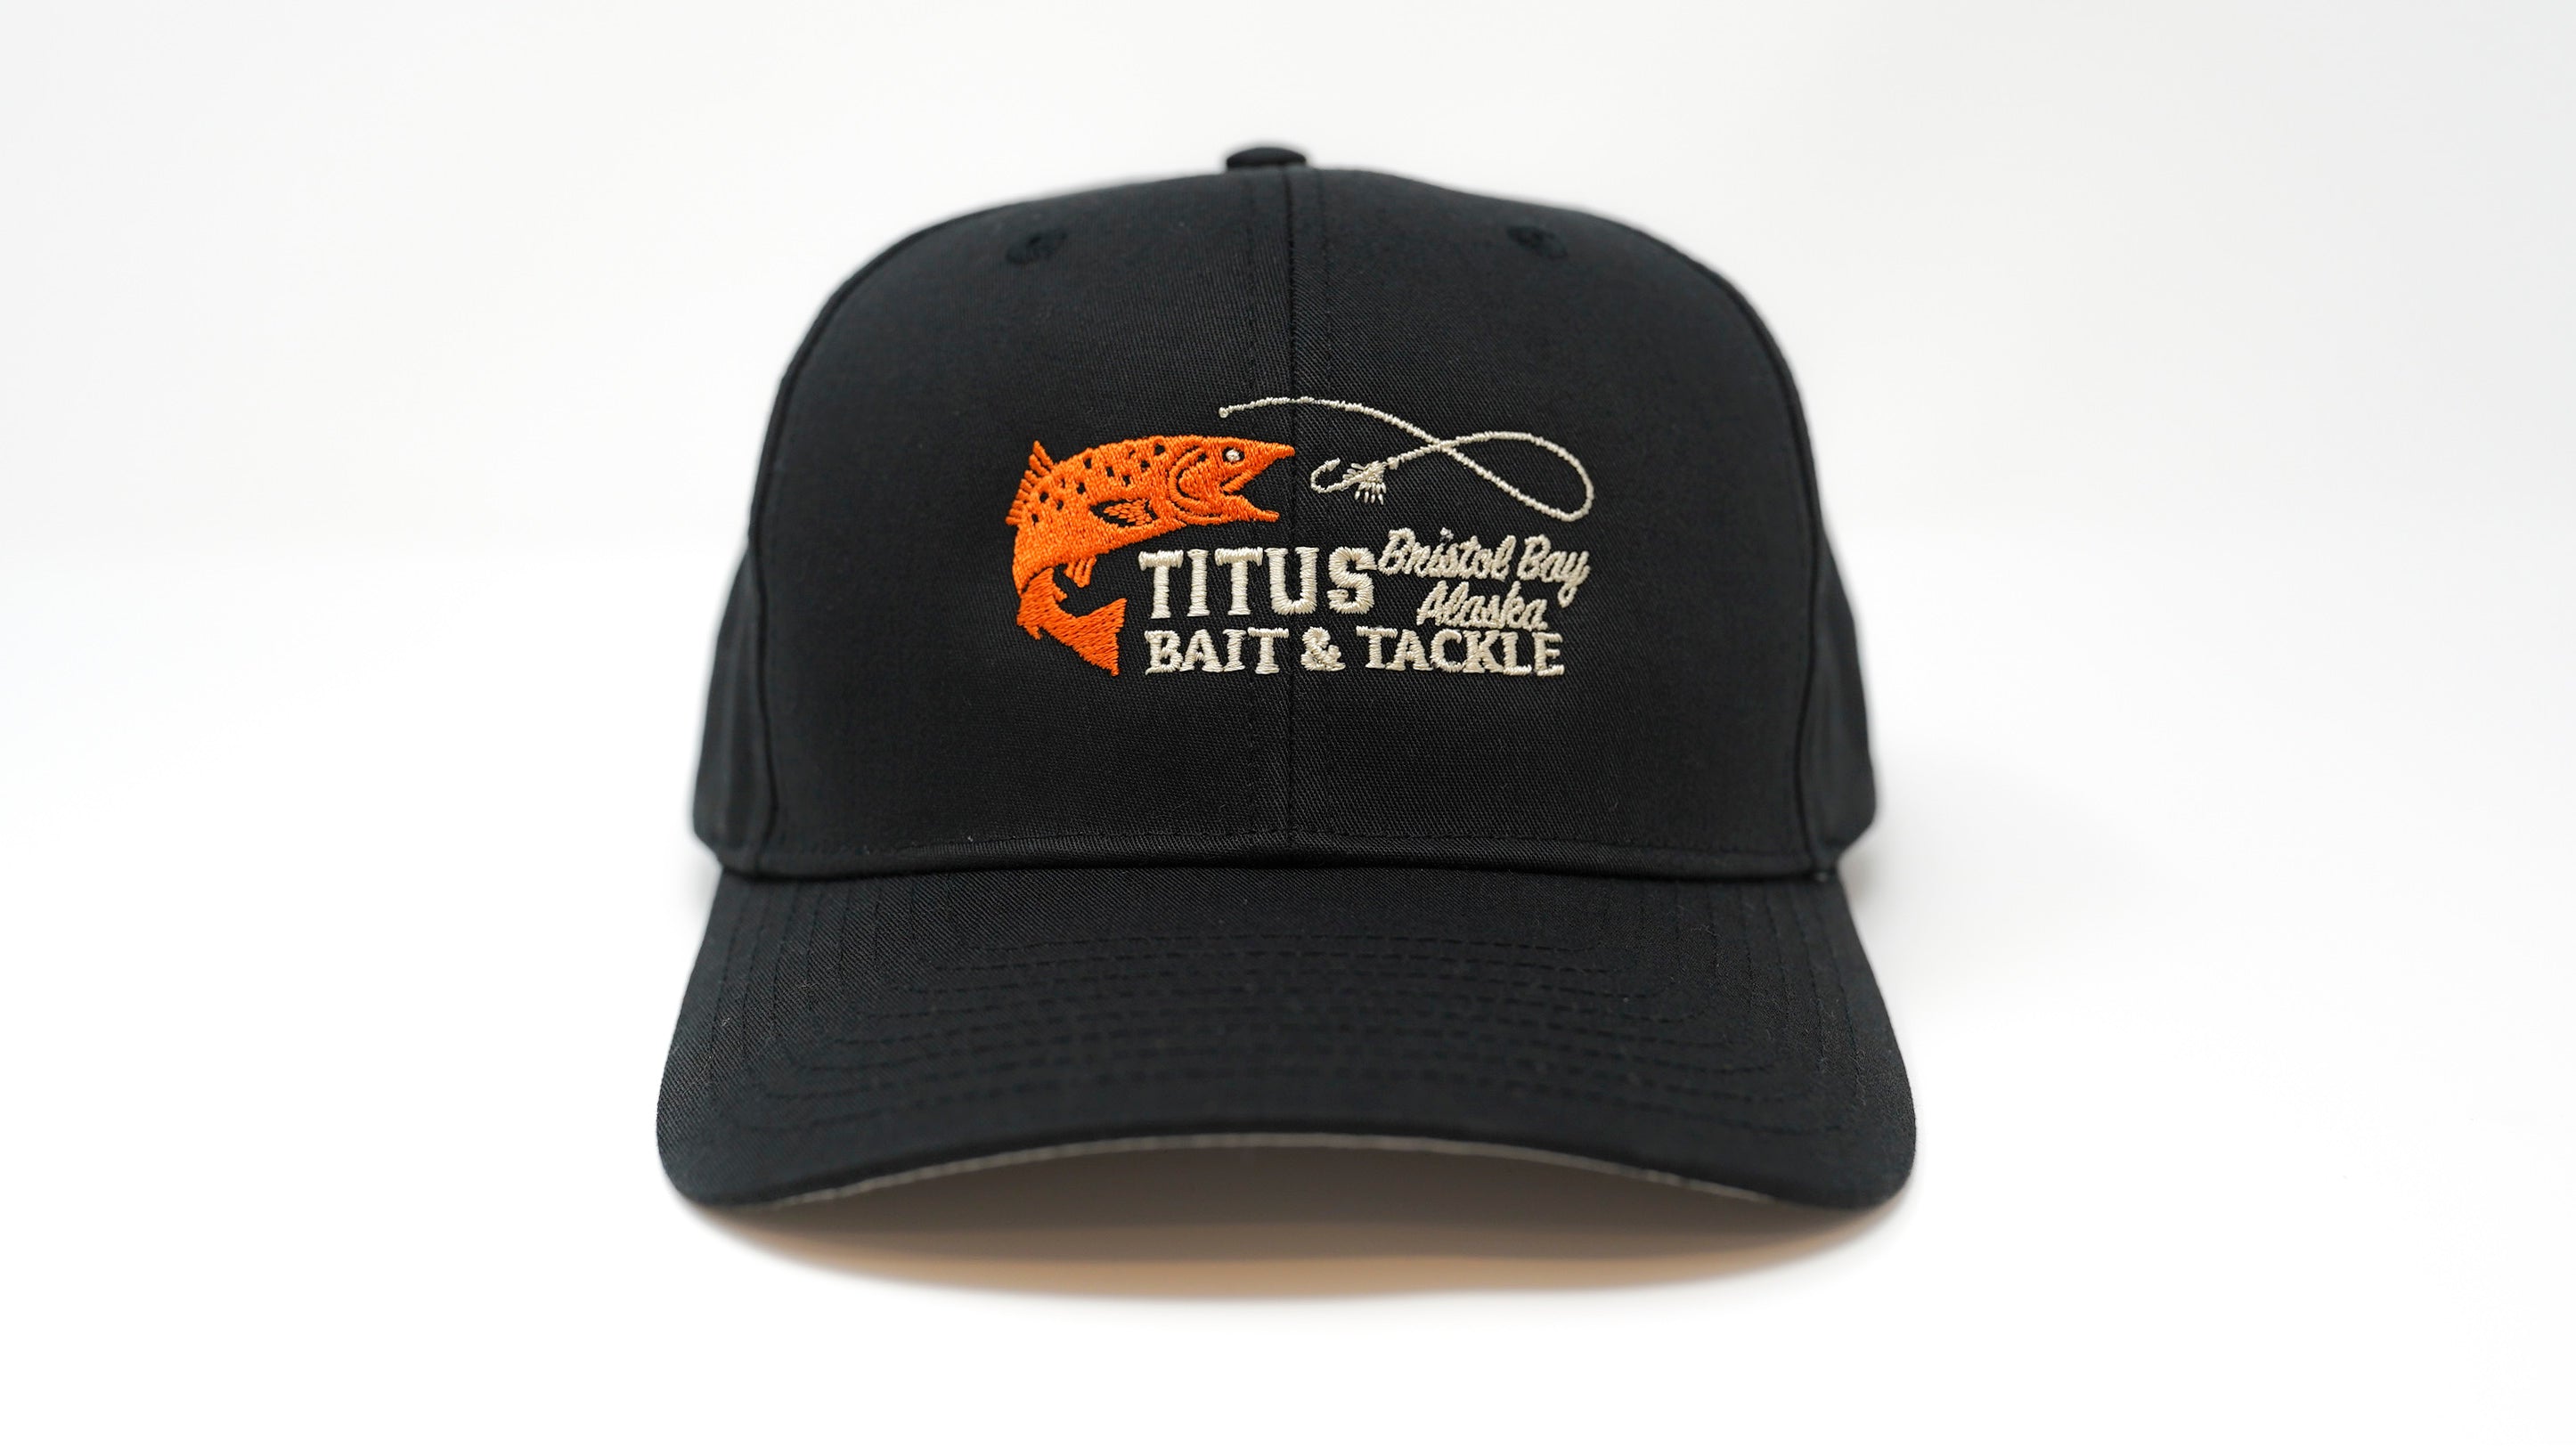 Titus Bristol Bay Bait and Tackle - Trucker Styler Pro Twill Hat